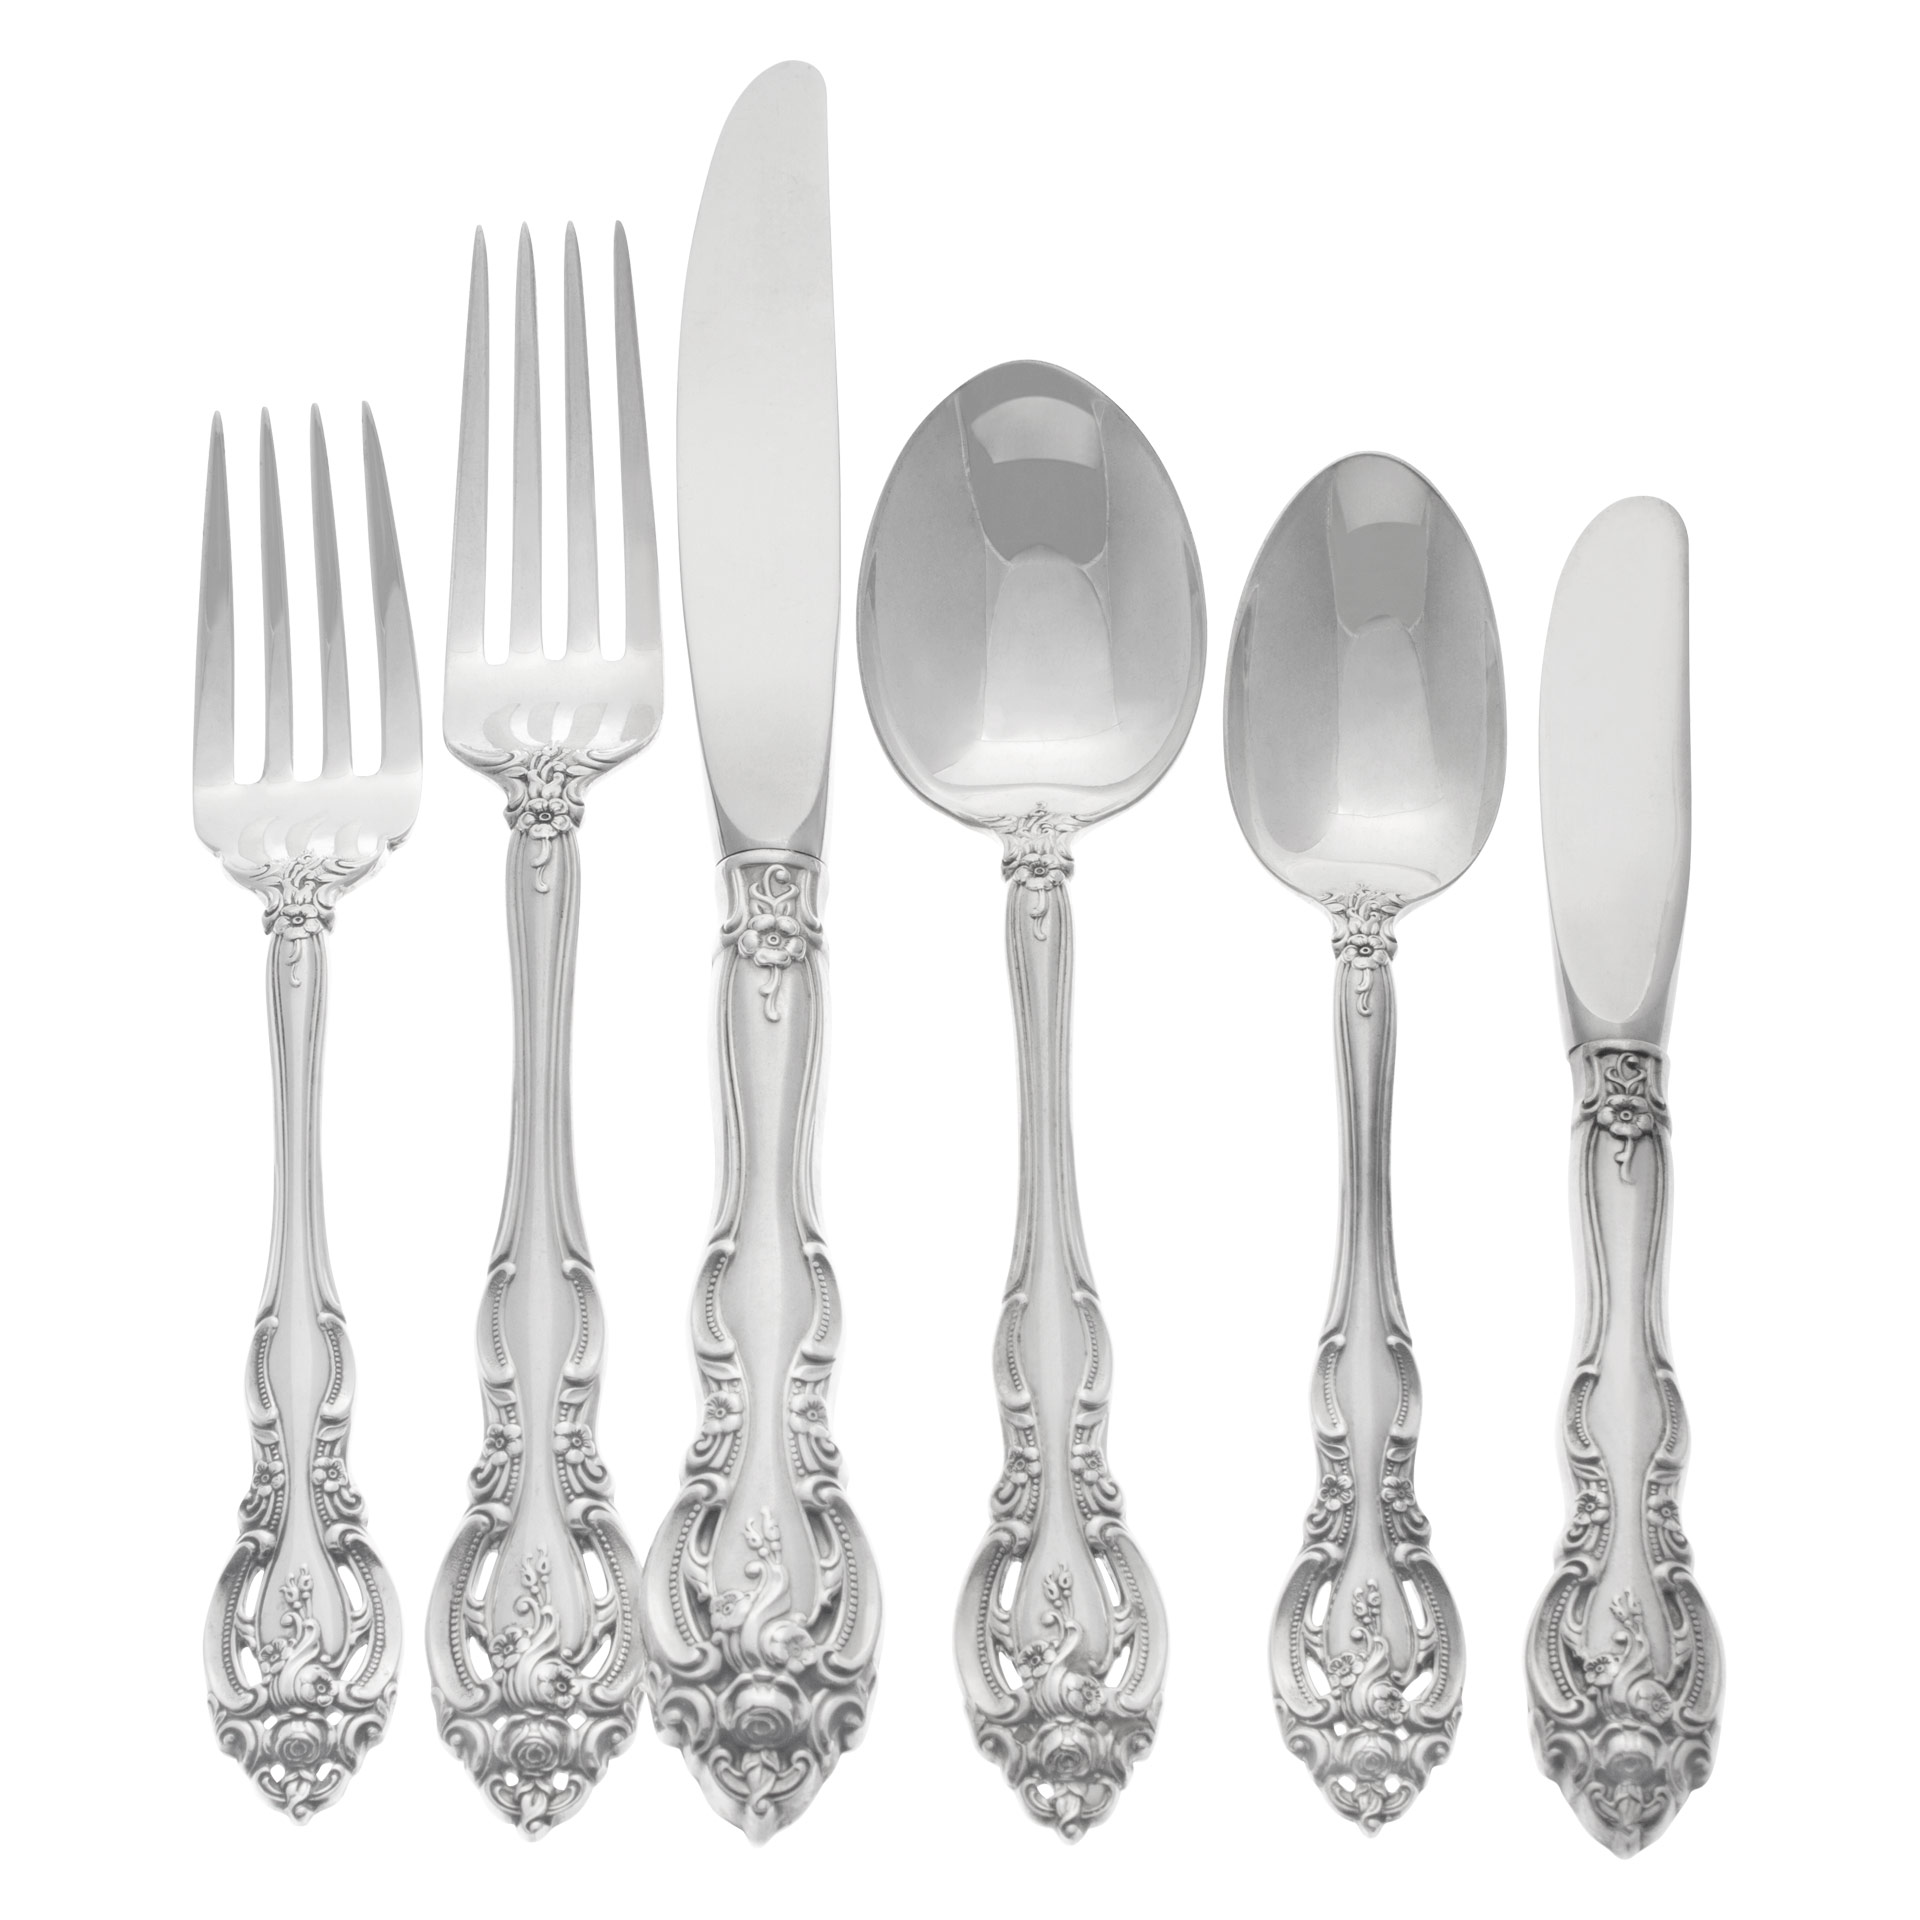 "LA SCALA" complete Sterling Silver Flatware Set, Ptd in 1964 by Gorham- 10 Place Set for 12 +11 Serving Pieces. Over 3800 sterling silver.